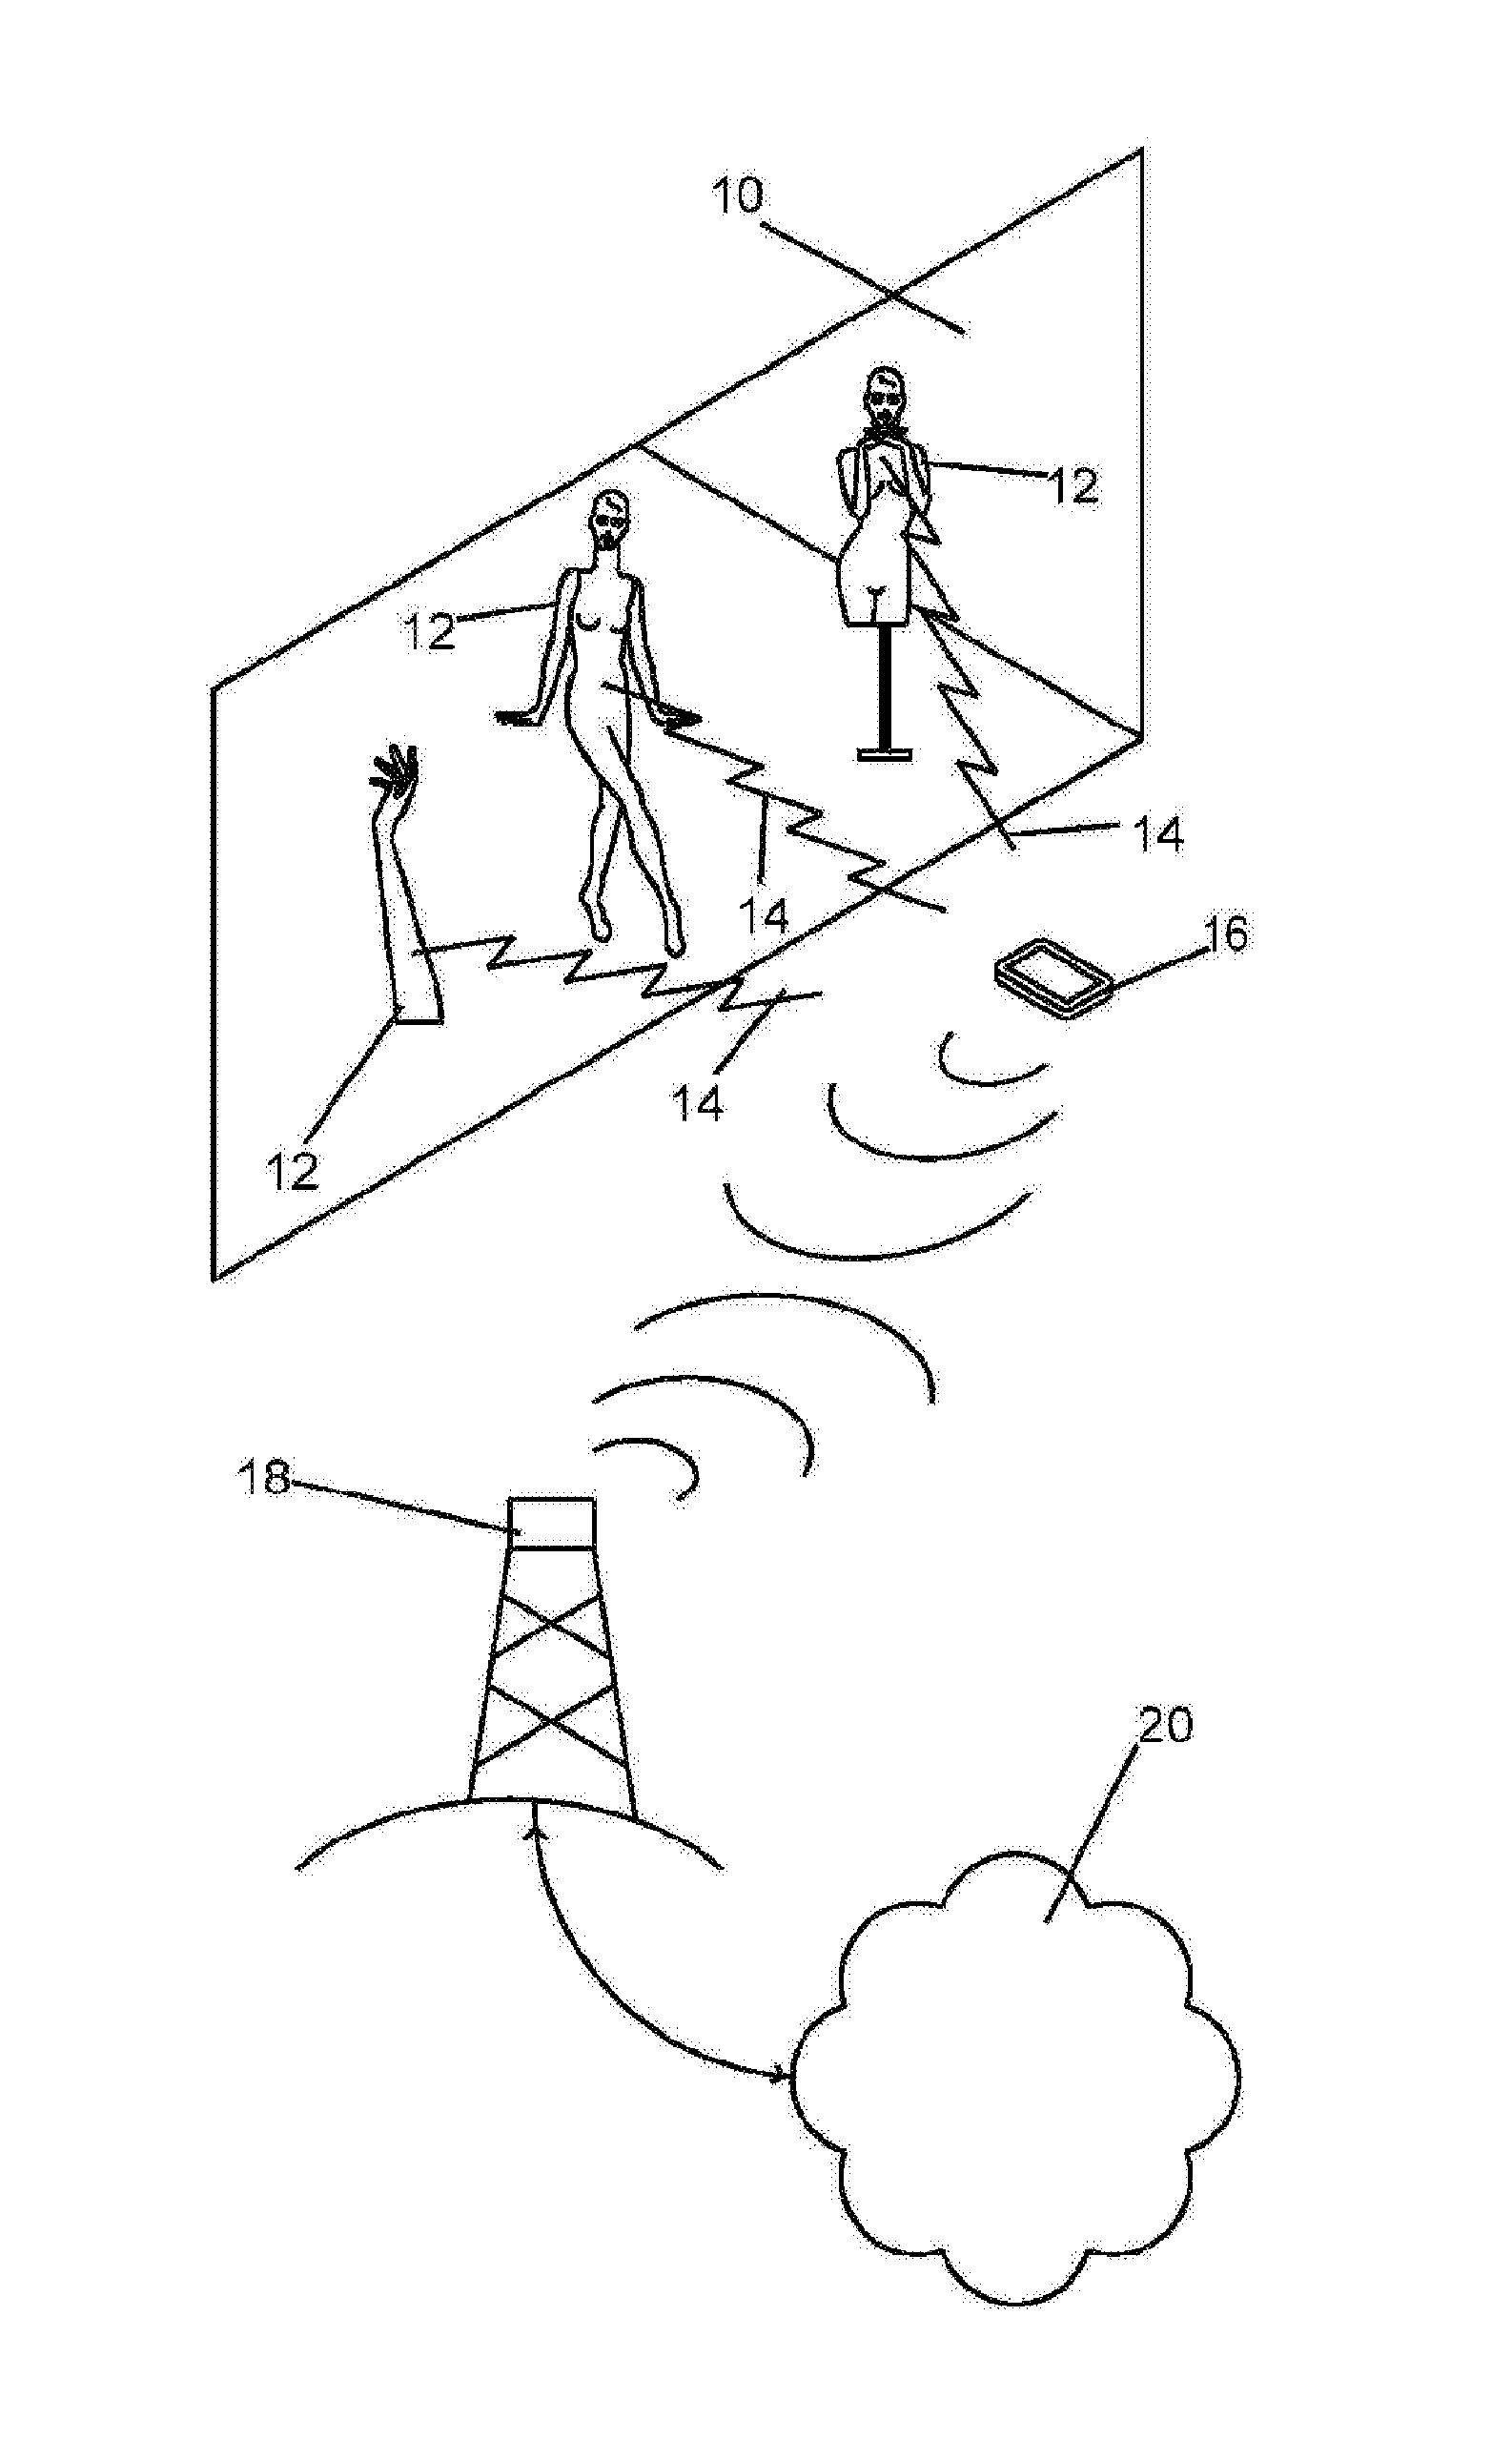 Display system and method